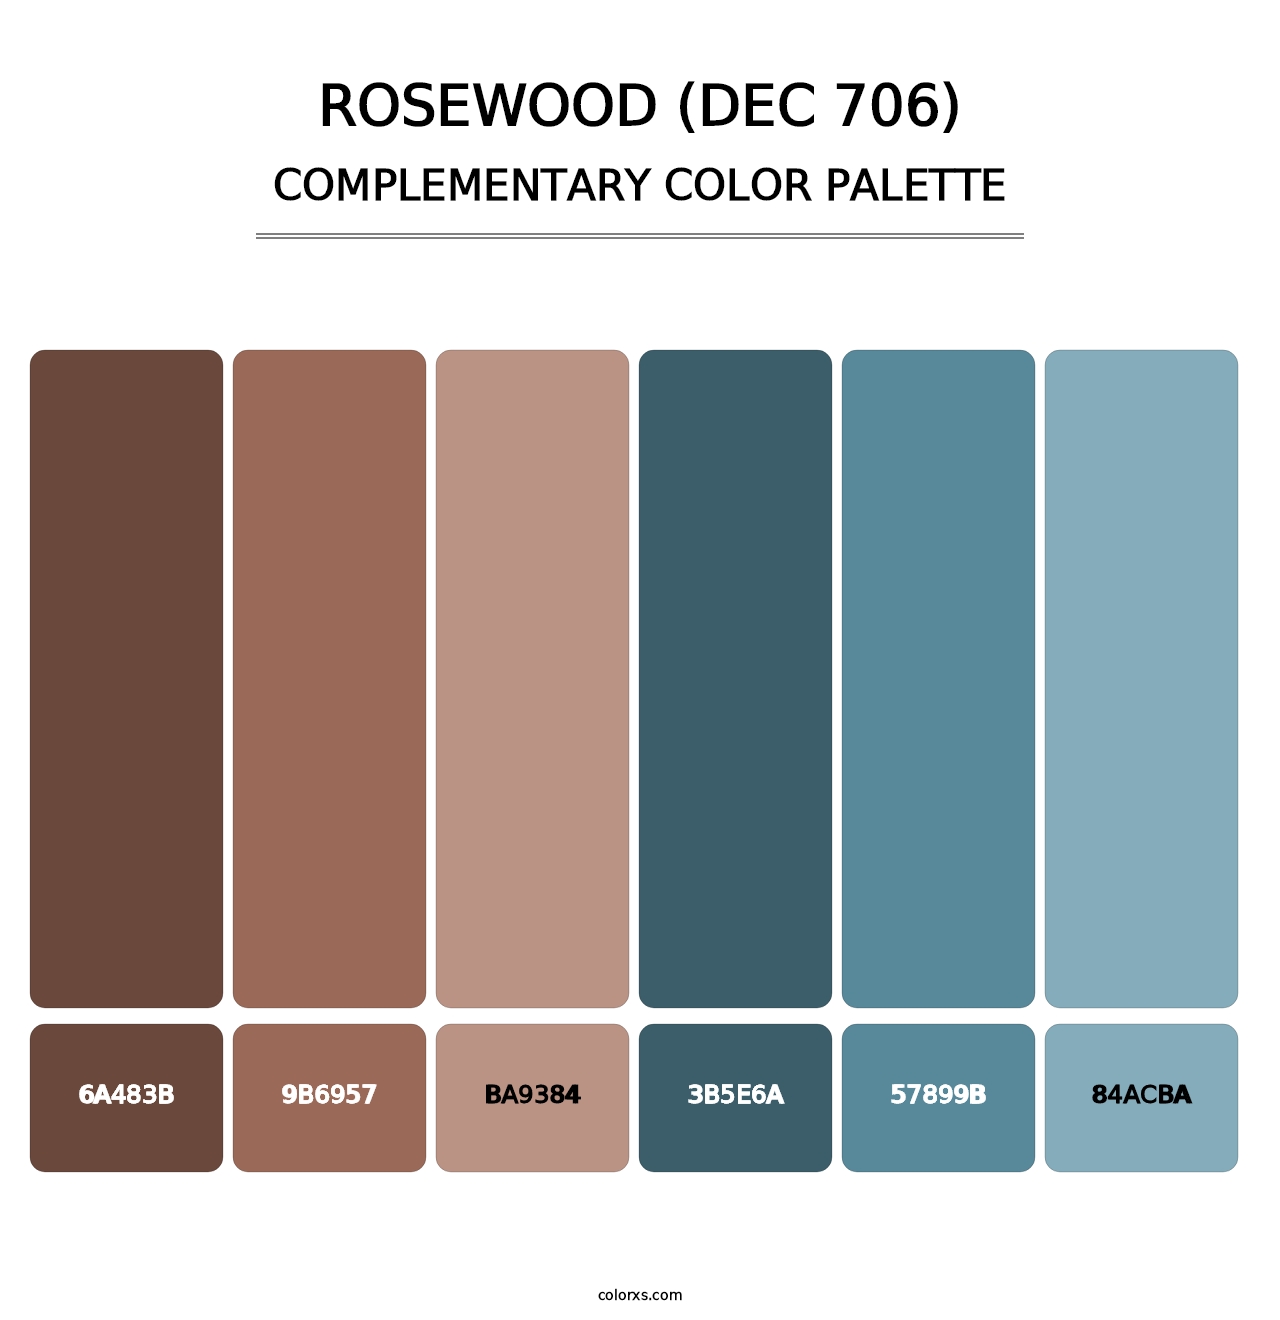 Rosewood (DEC 706) - Complementary Color Palette